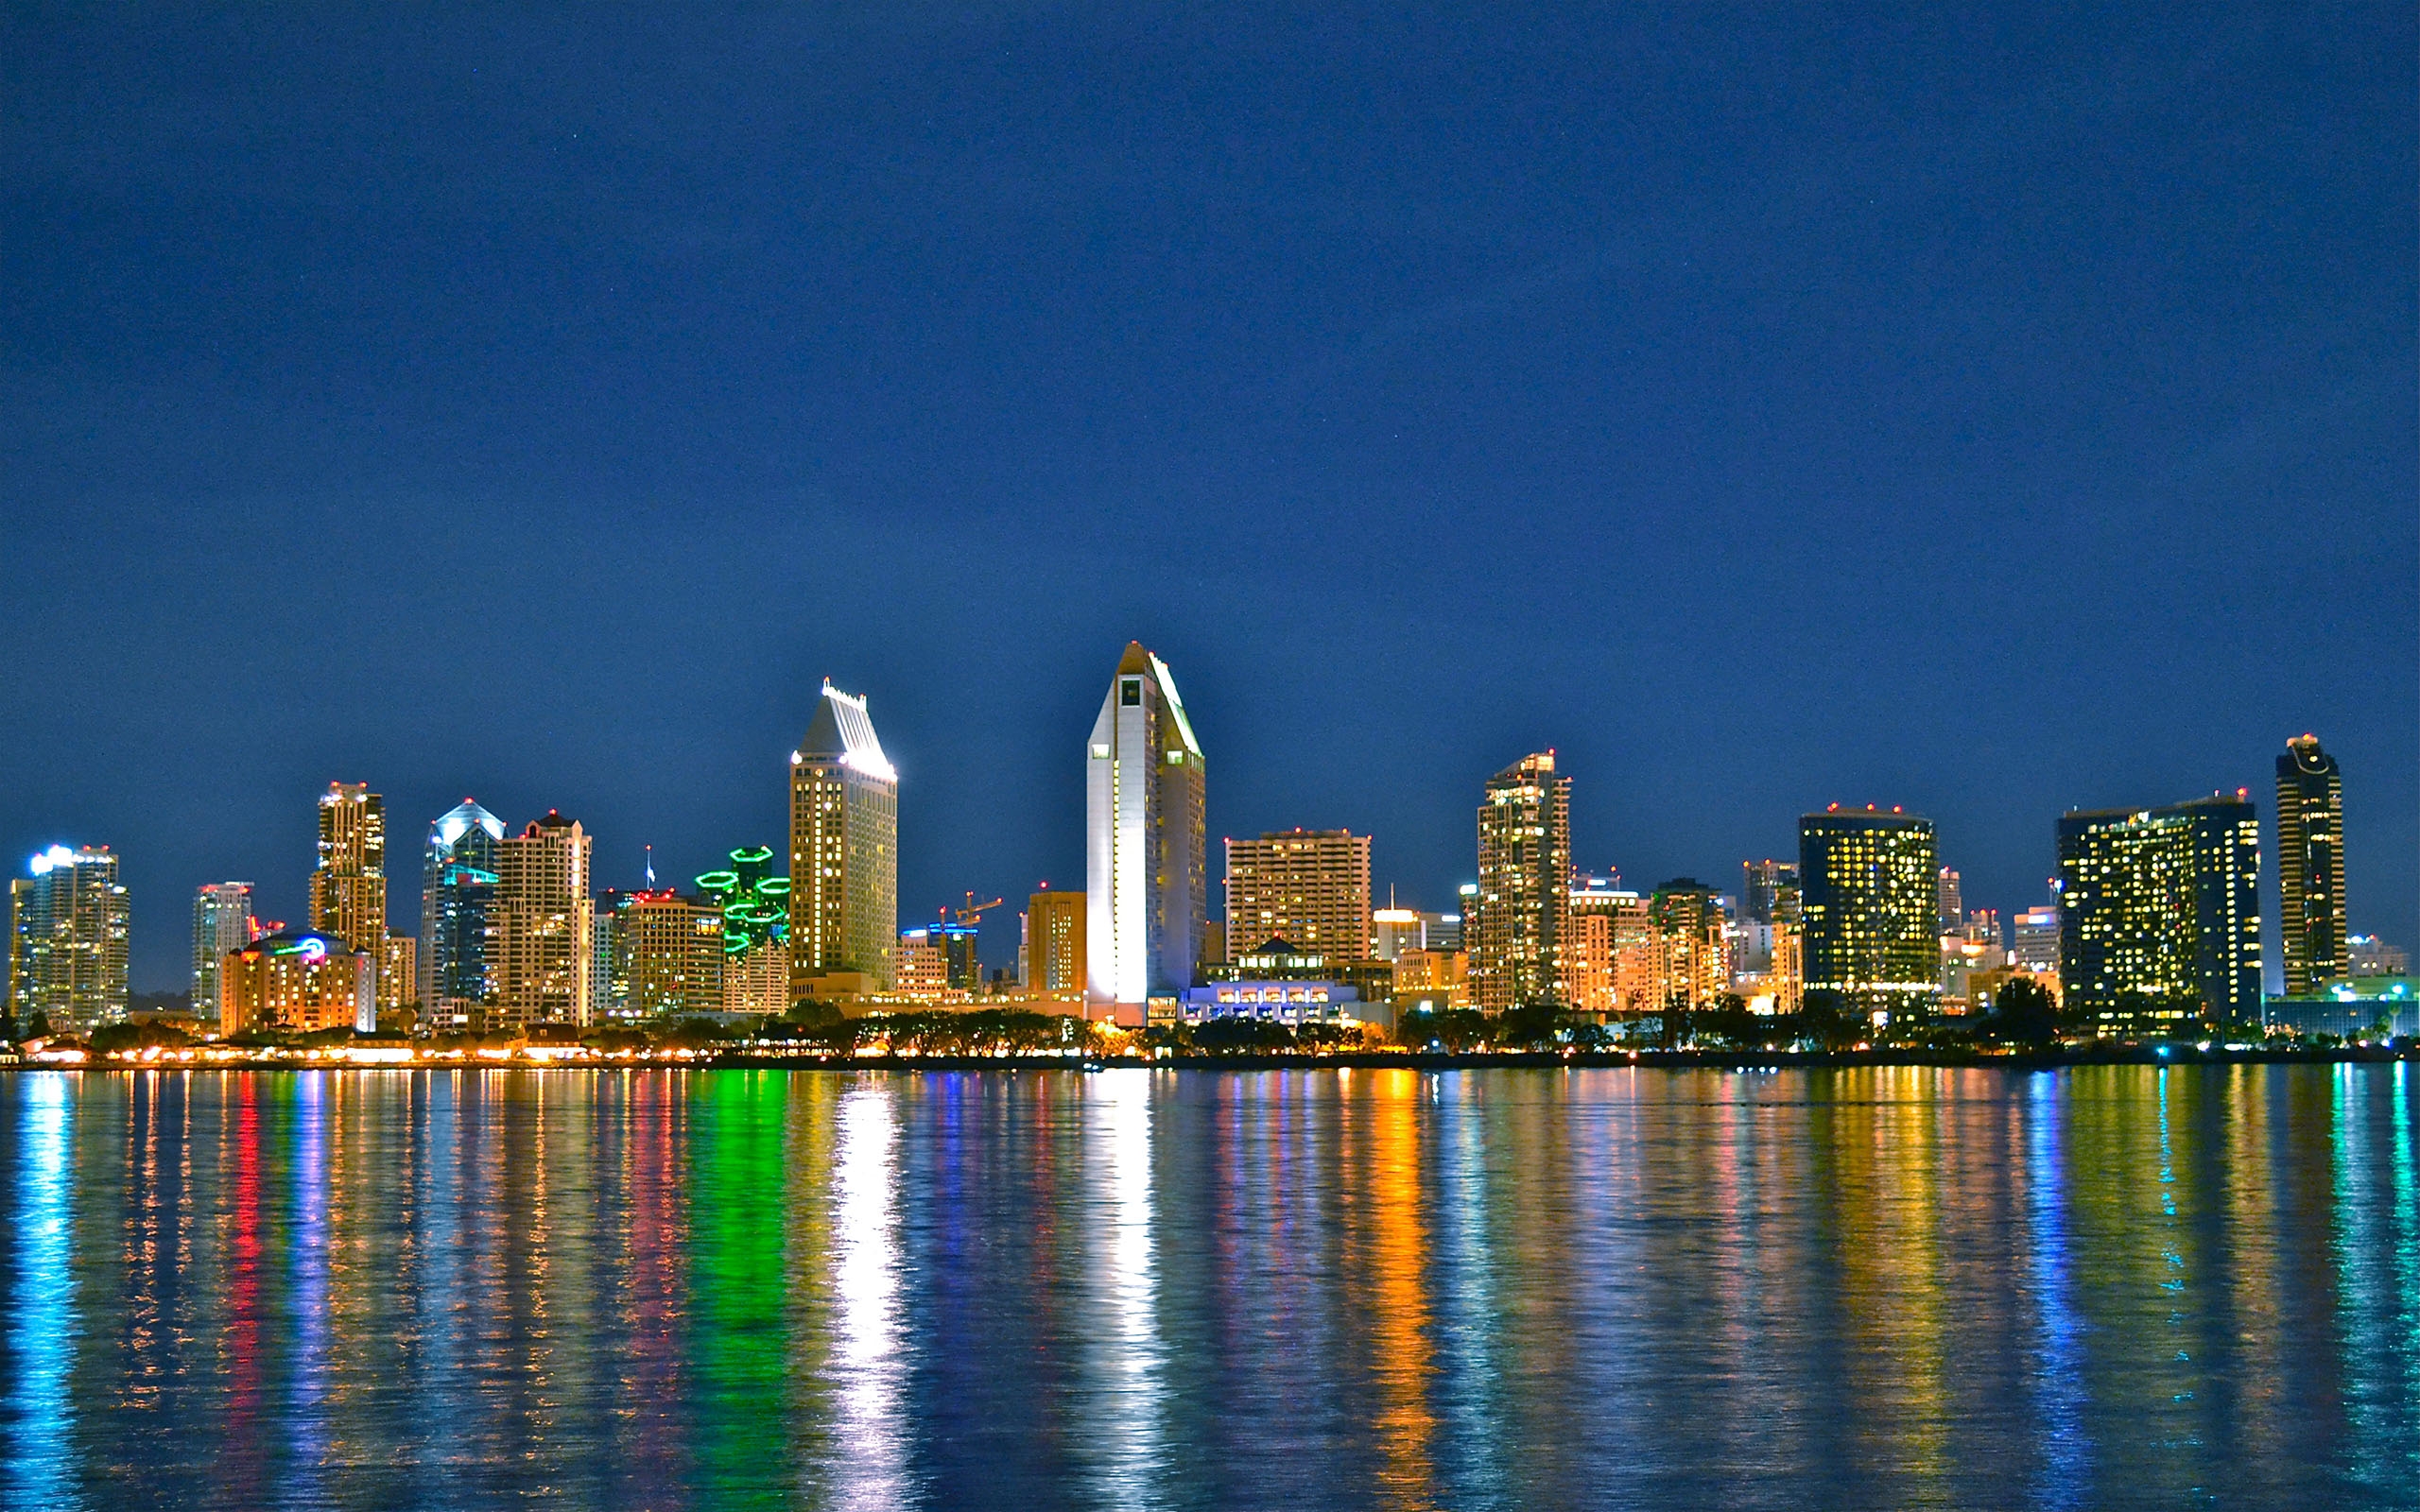 San Diego in the night